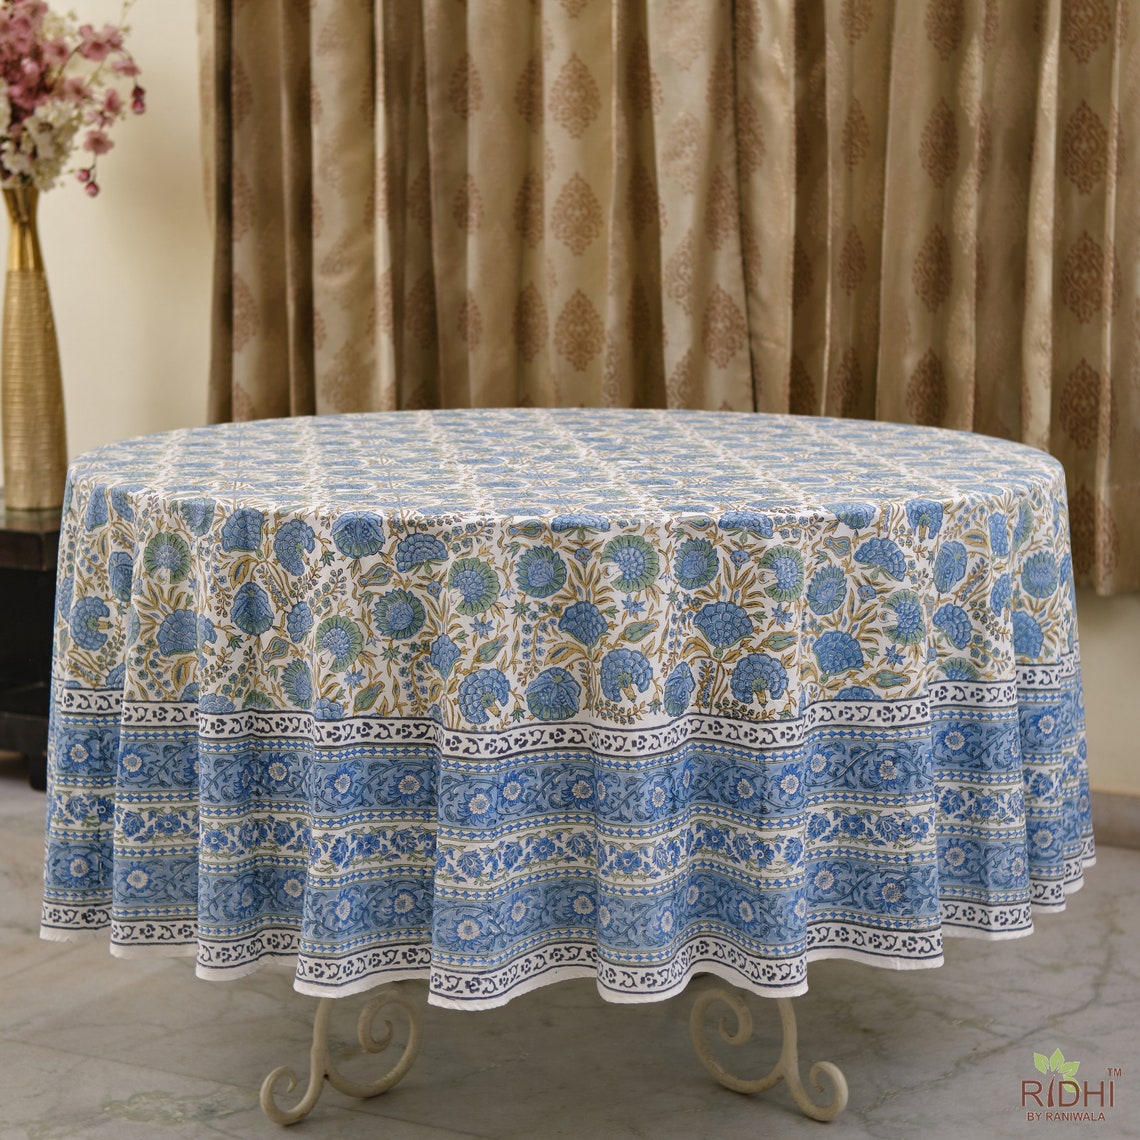 Asparagus Green, Air Force Blue Indian Hand Block Floral Printed Cotton Cloth Round Tablecloth, Farmhouse Wedding Home Events Party Gifts